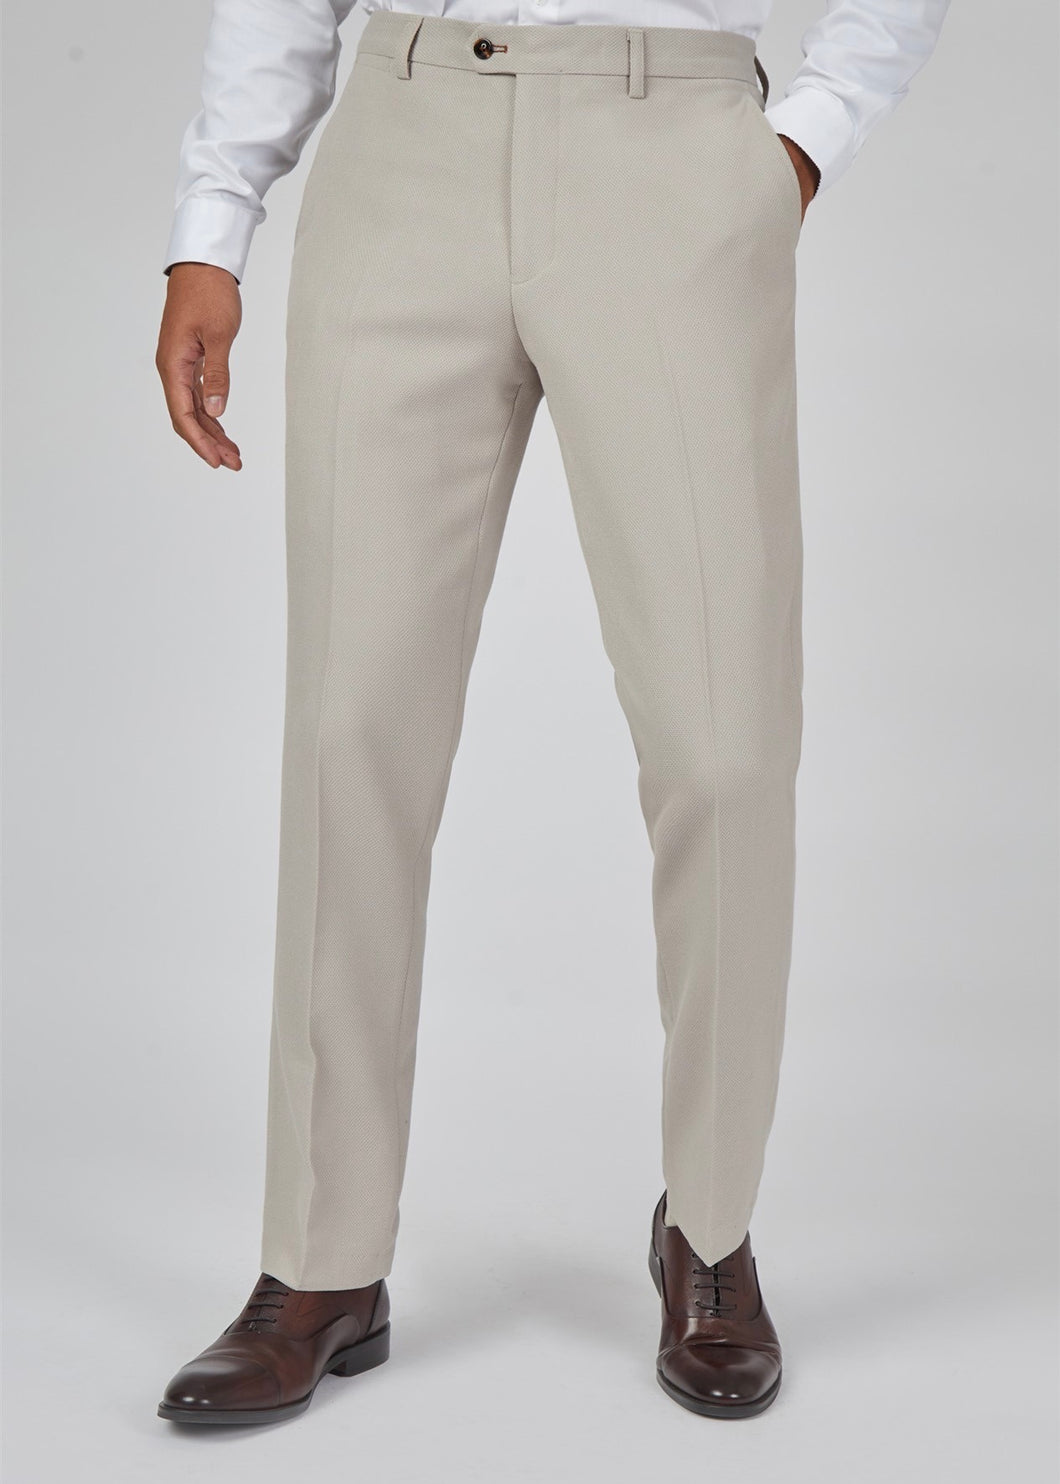 Stone men's suit Marc Darcy HM5 - front of trousers.